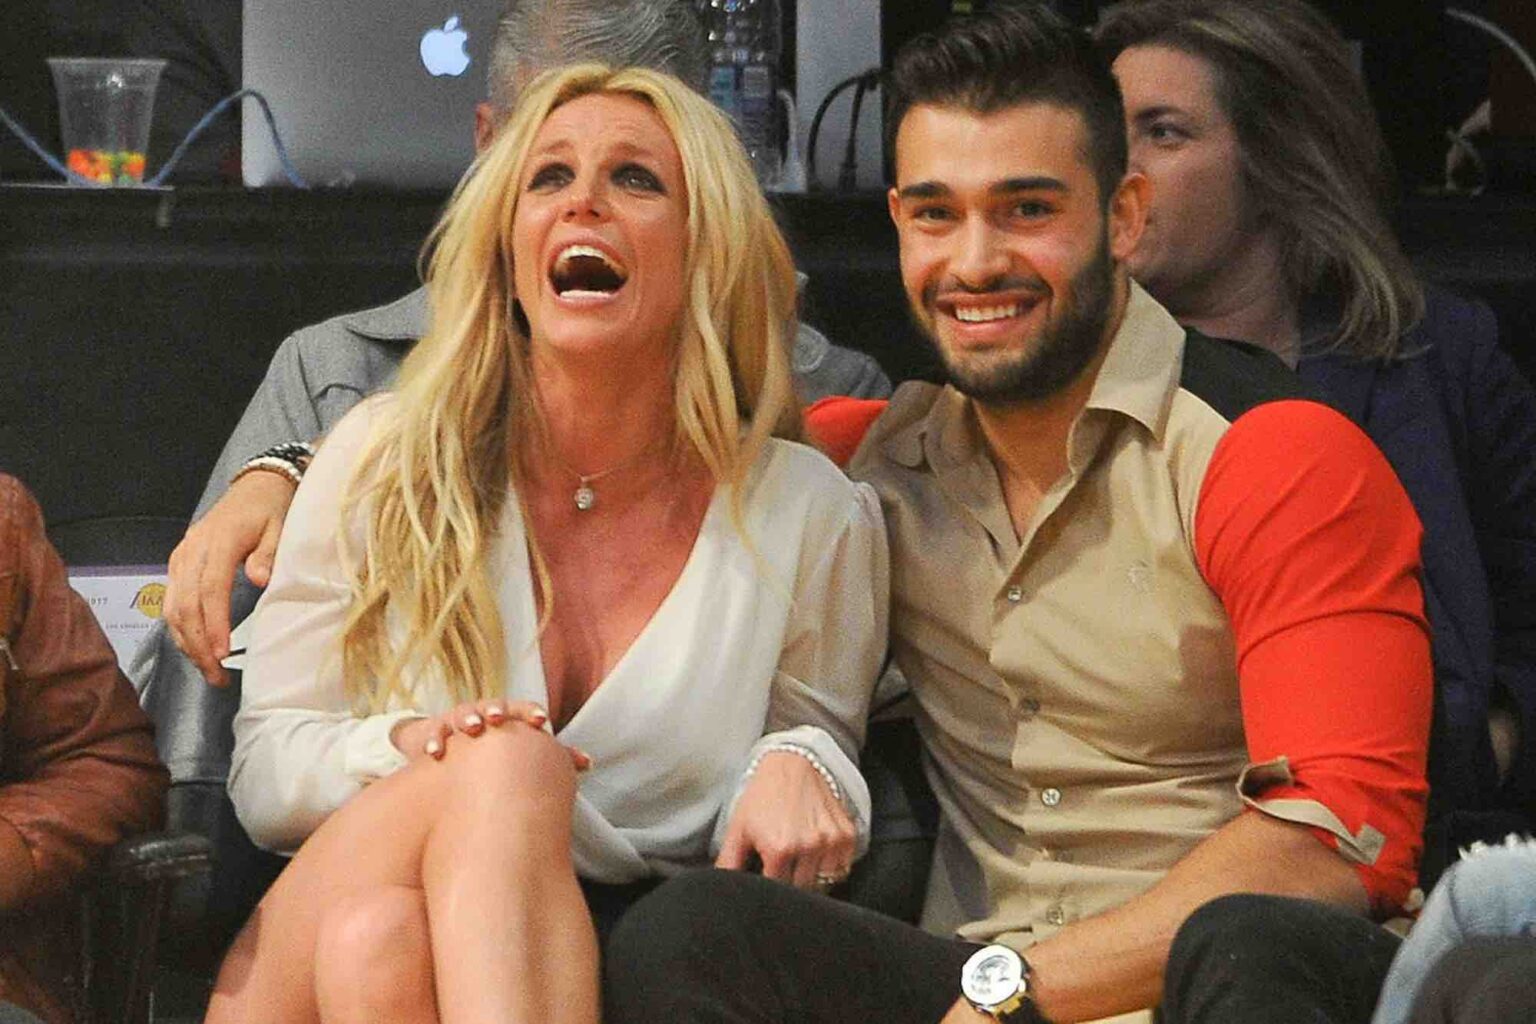 Did Britney Spears' main squeeze Sam Asghari confirm a tour in the singer's future? Get the details inside about the recent comments.